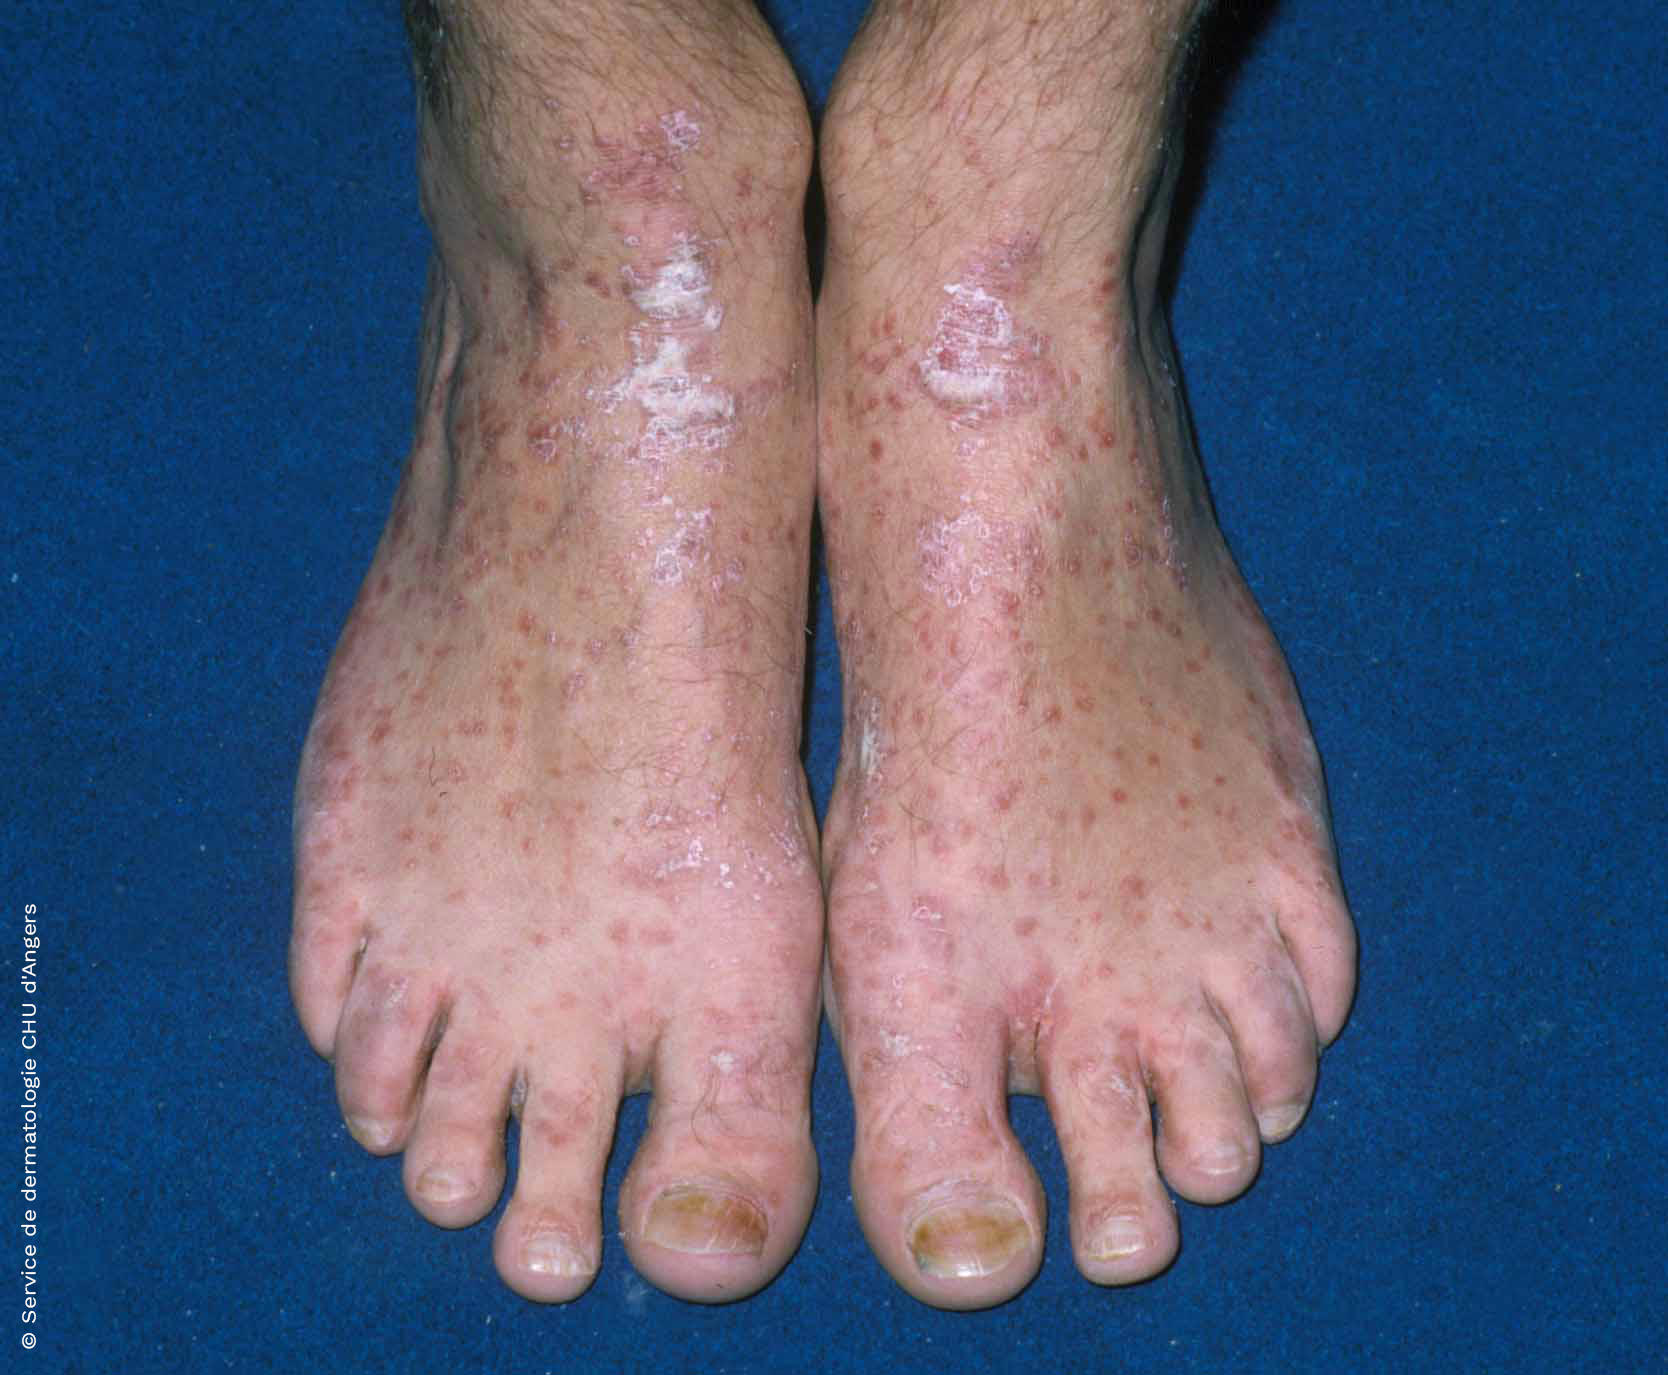 Psoriasis of the feet